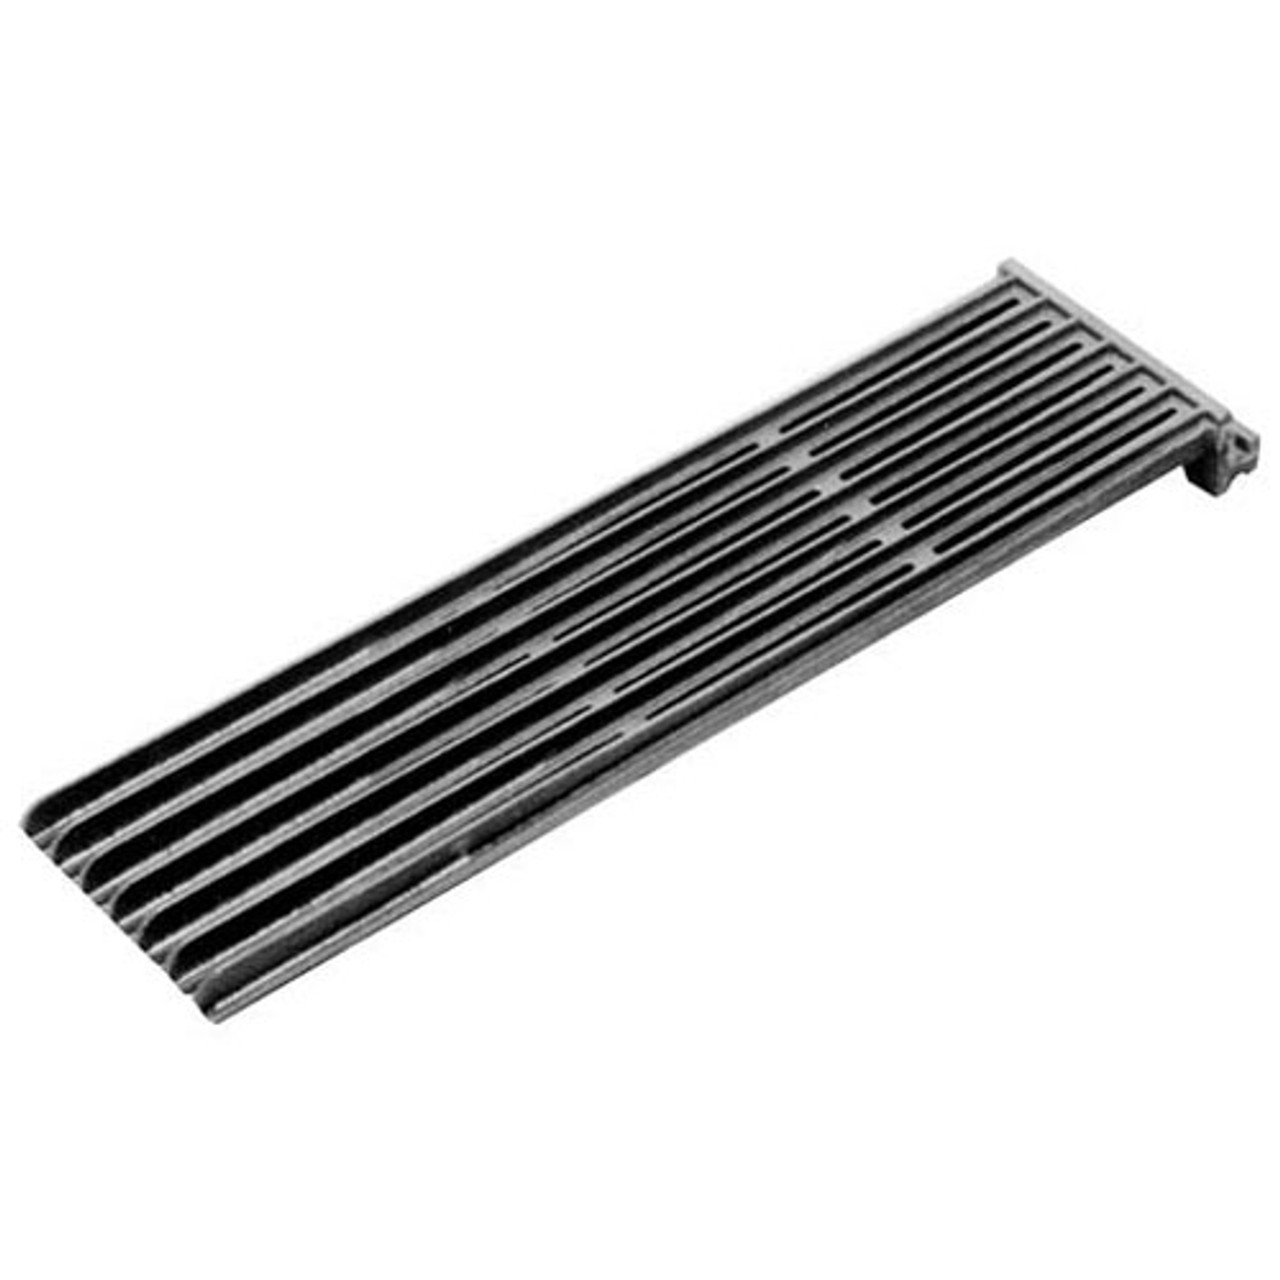 Grate 20-3/4 X 5-5/8 - Replacement Part For Hobart 00-710423